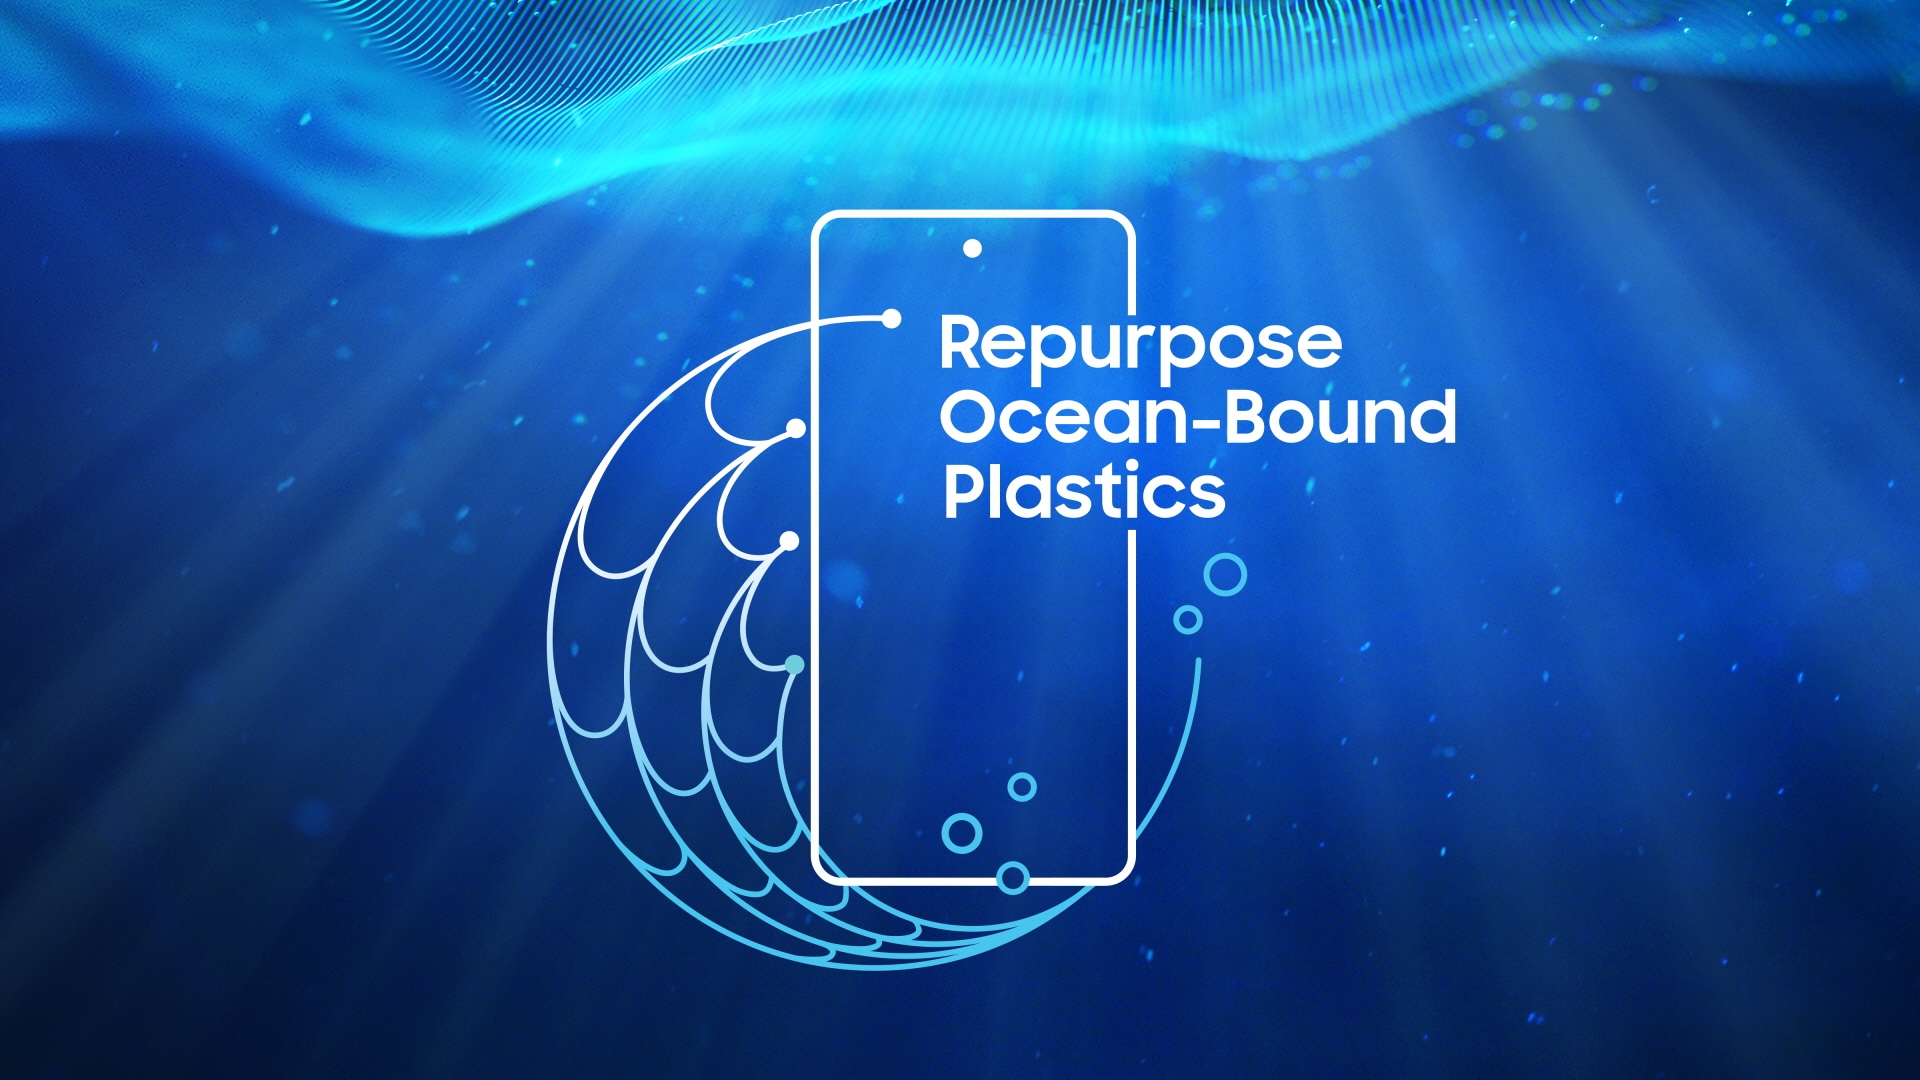 Samusng repurposed ocean-bound plastics for smartphones and other devices